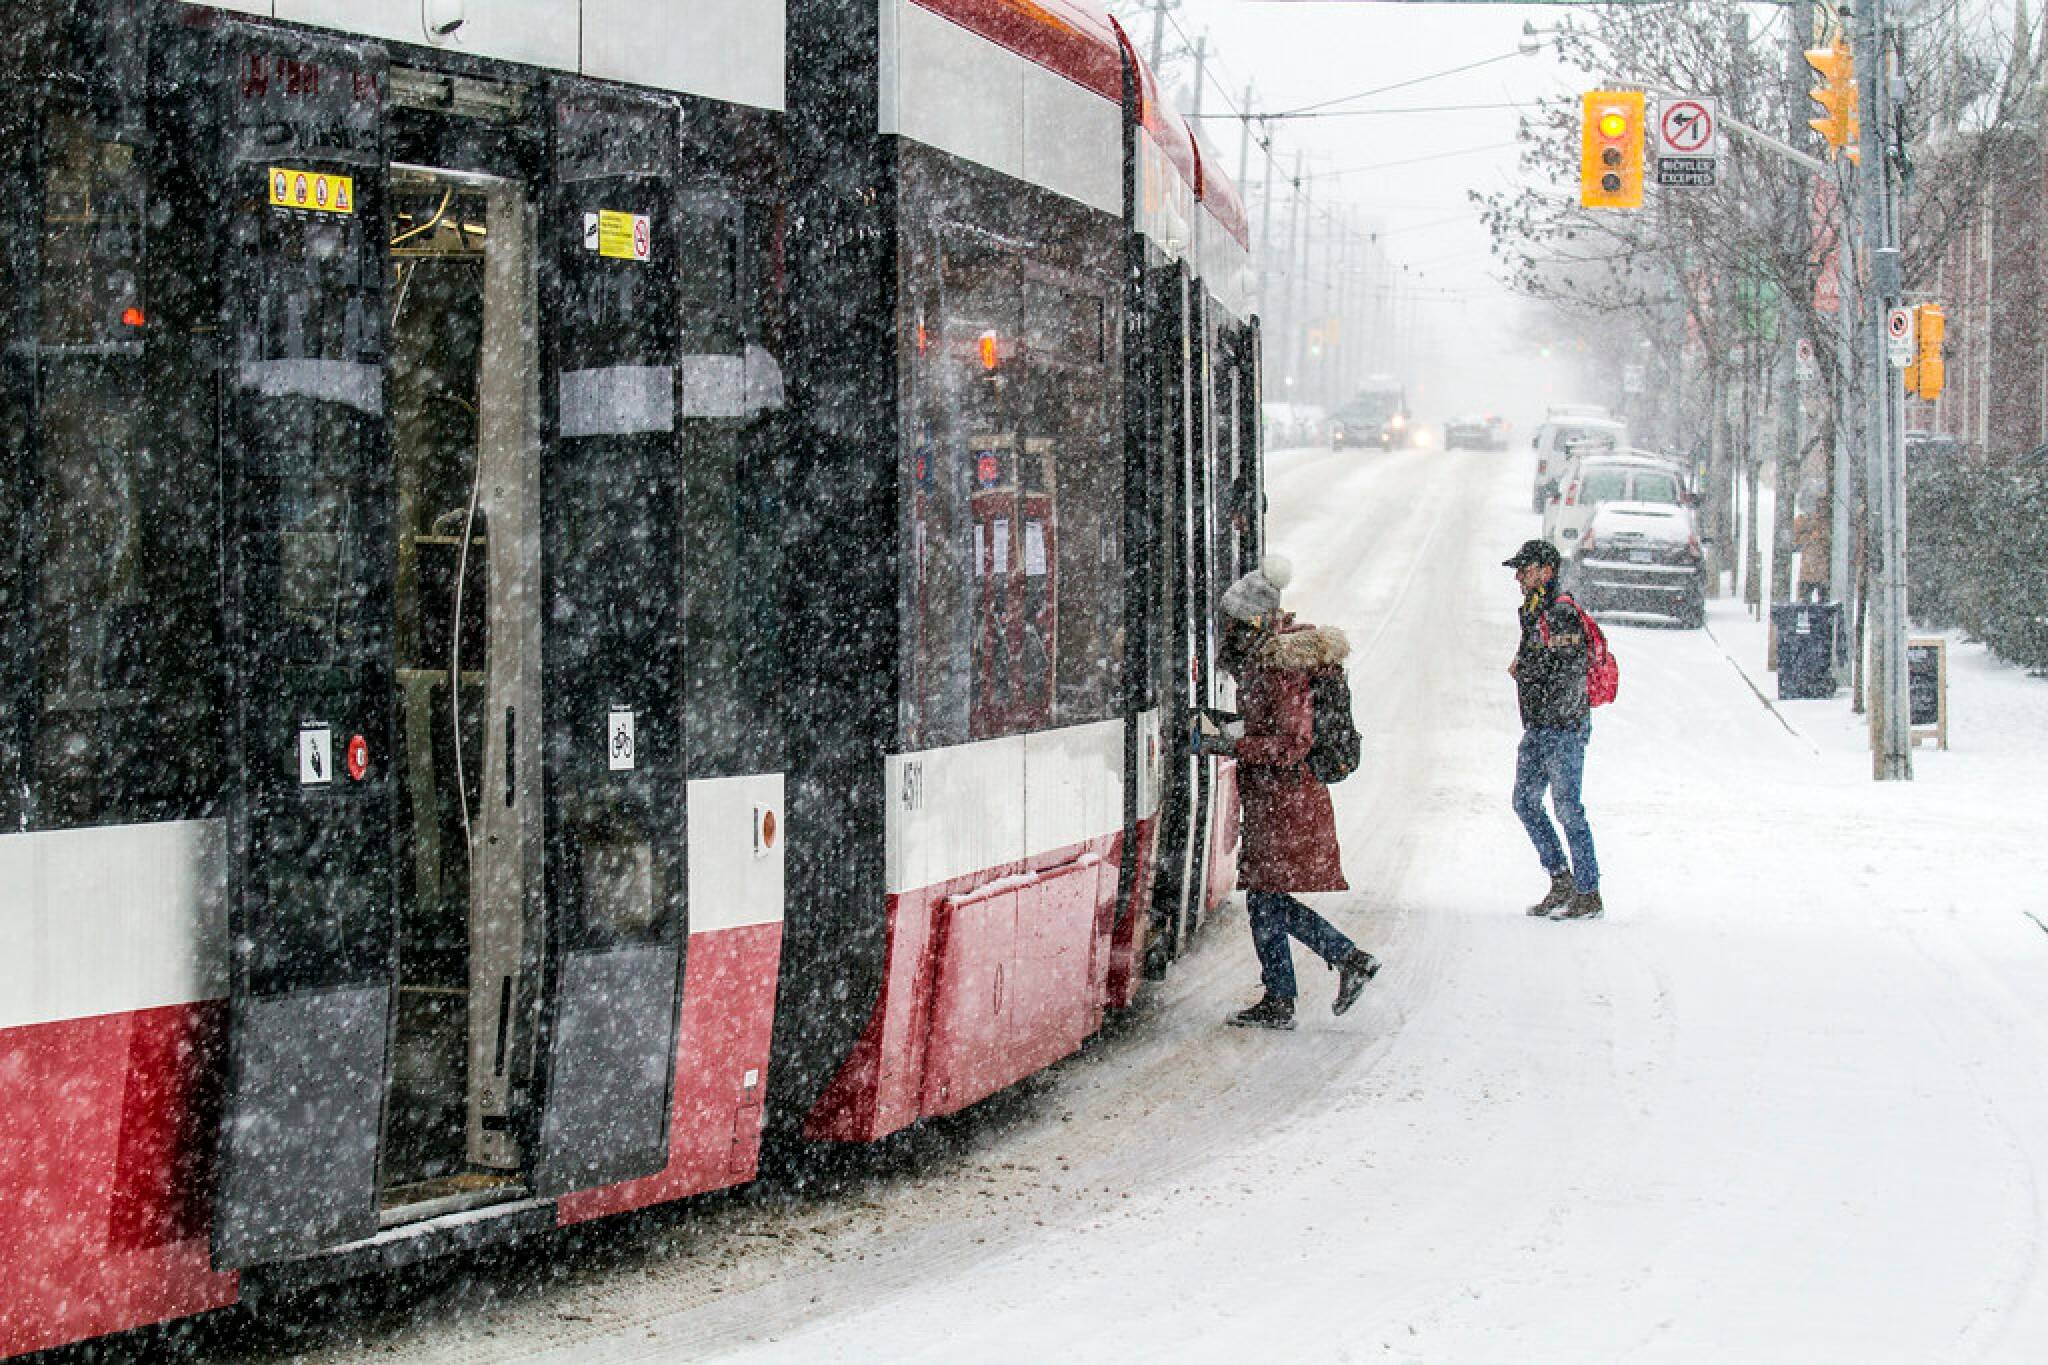 The first week of February will bring messy winter weather to Toronto